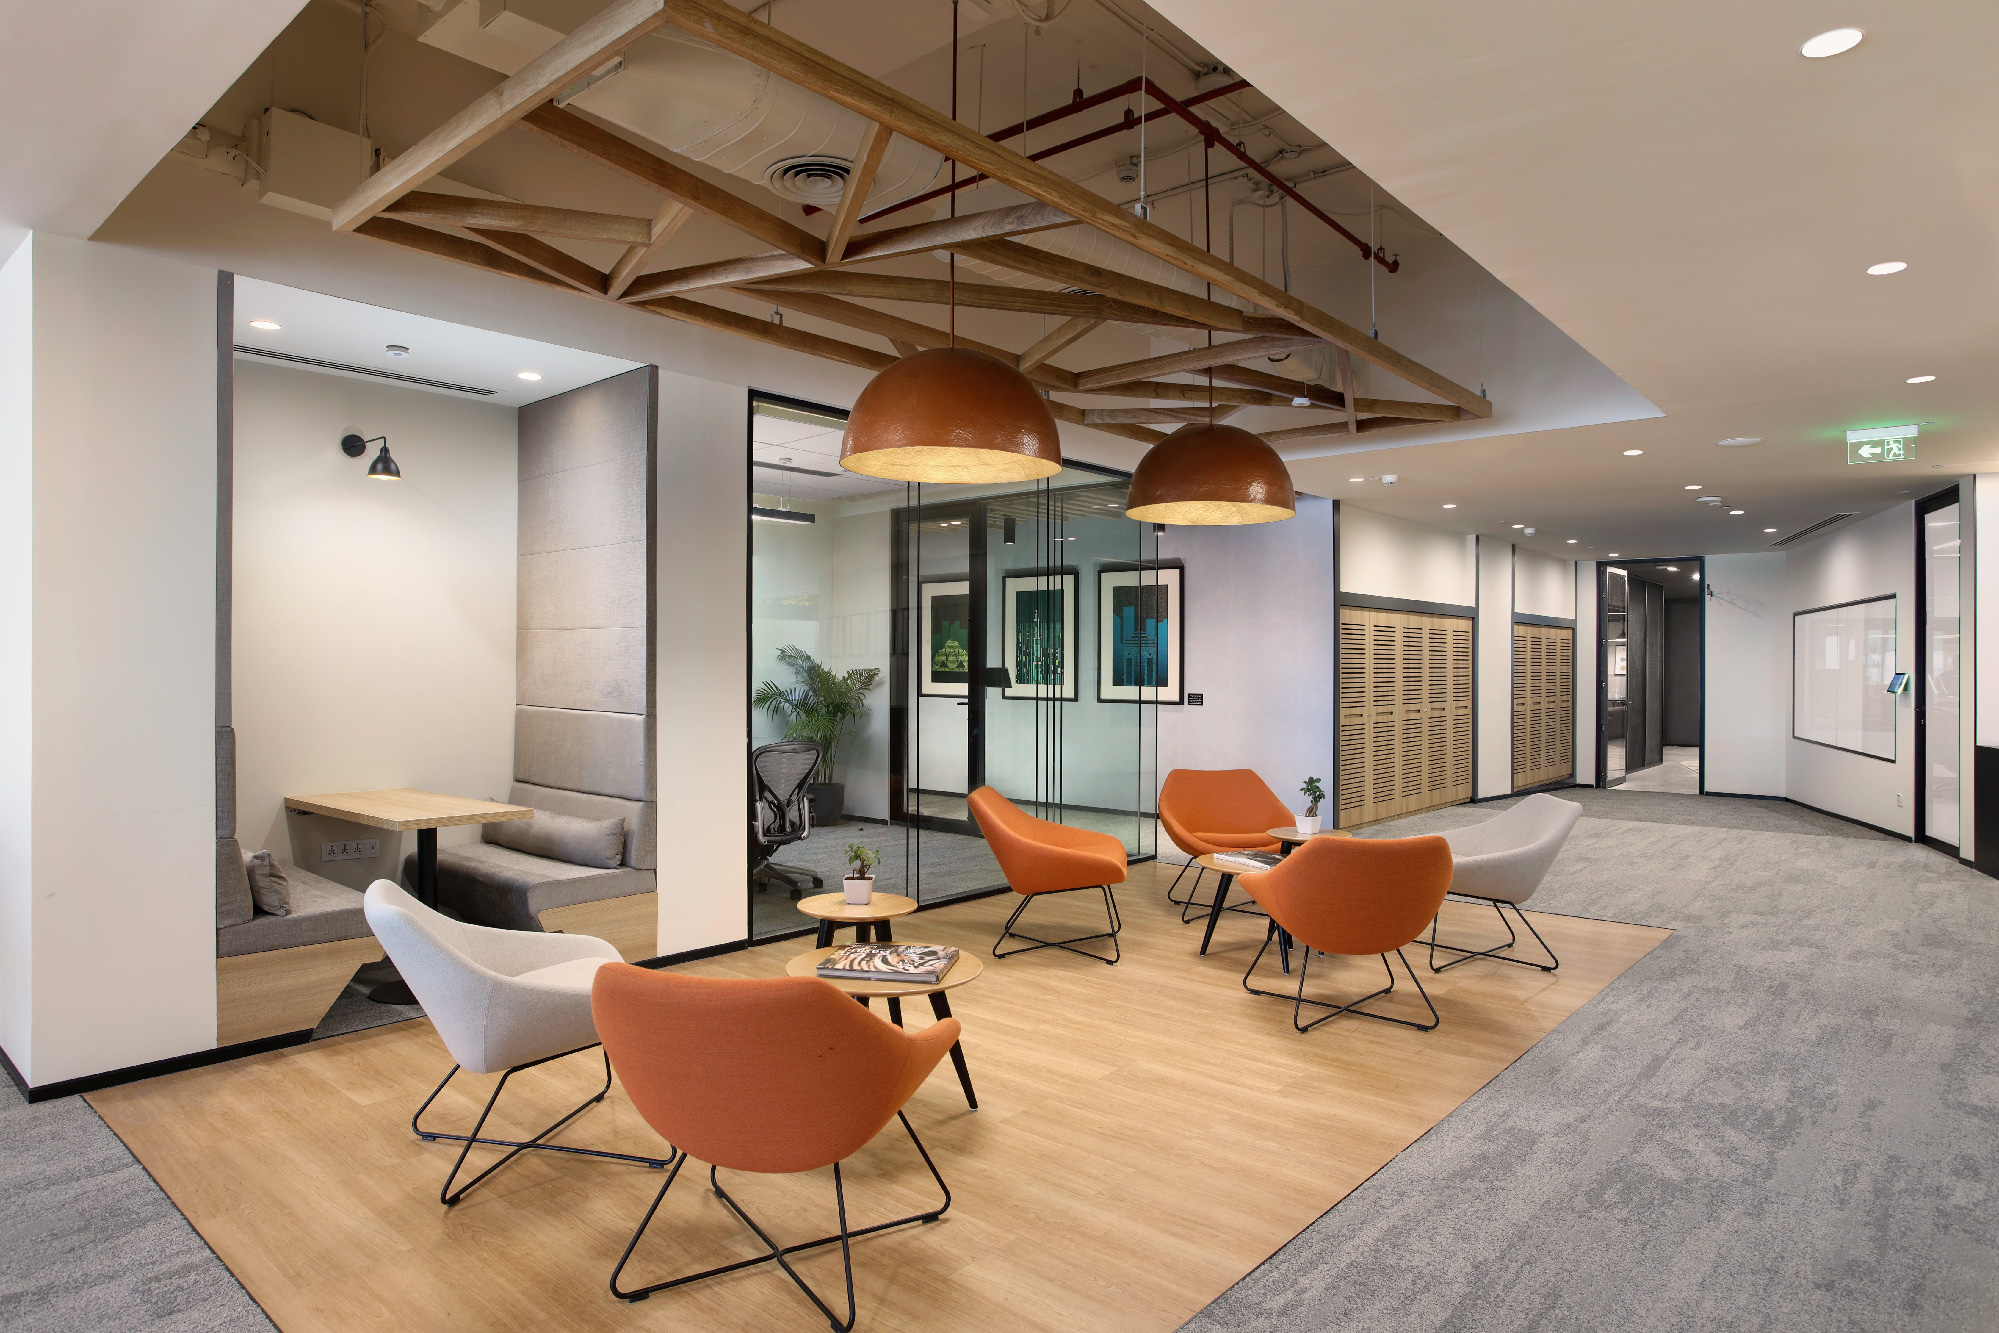 BCG Office - Circadian lighting enhances the workspace and supports employee well-being